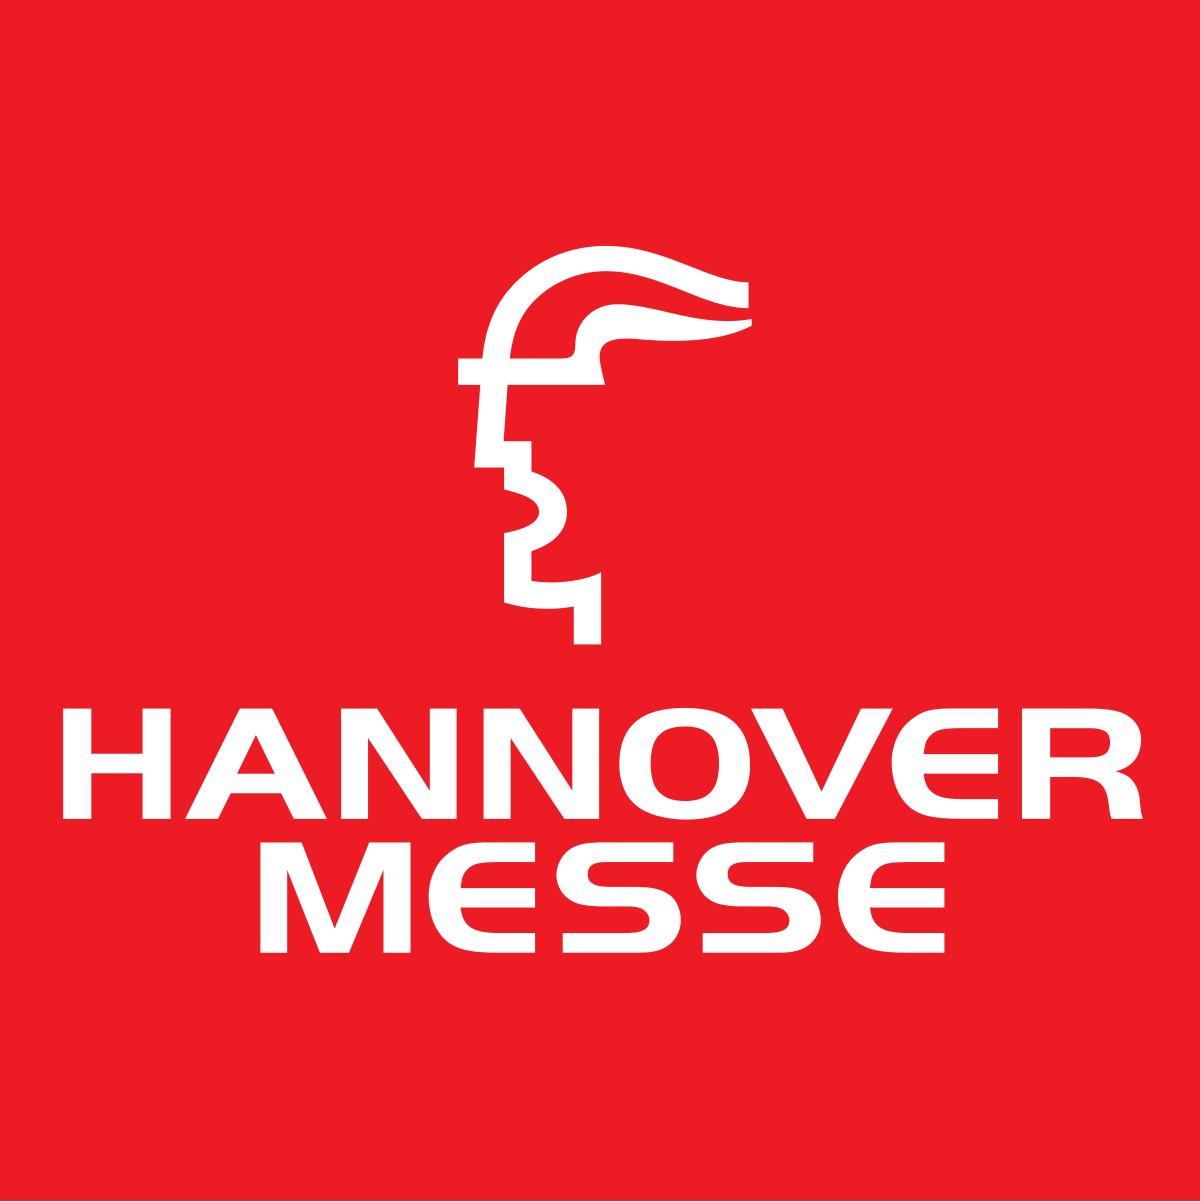 https://upload.wikimedia.org/wikipedia/de/thumb/7/76/Hannover_Messe.svg/1200px-Hannover_Messe.svg.png